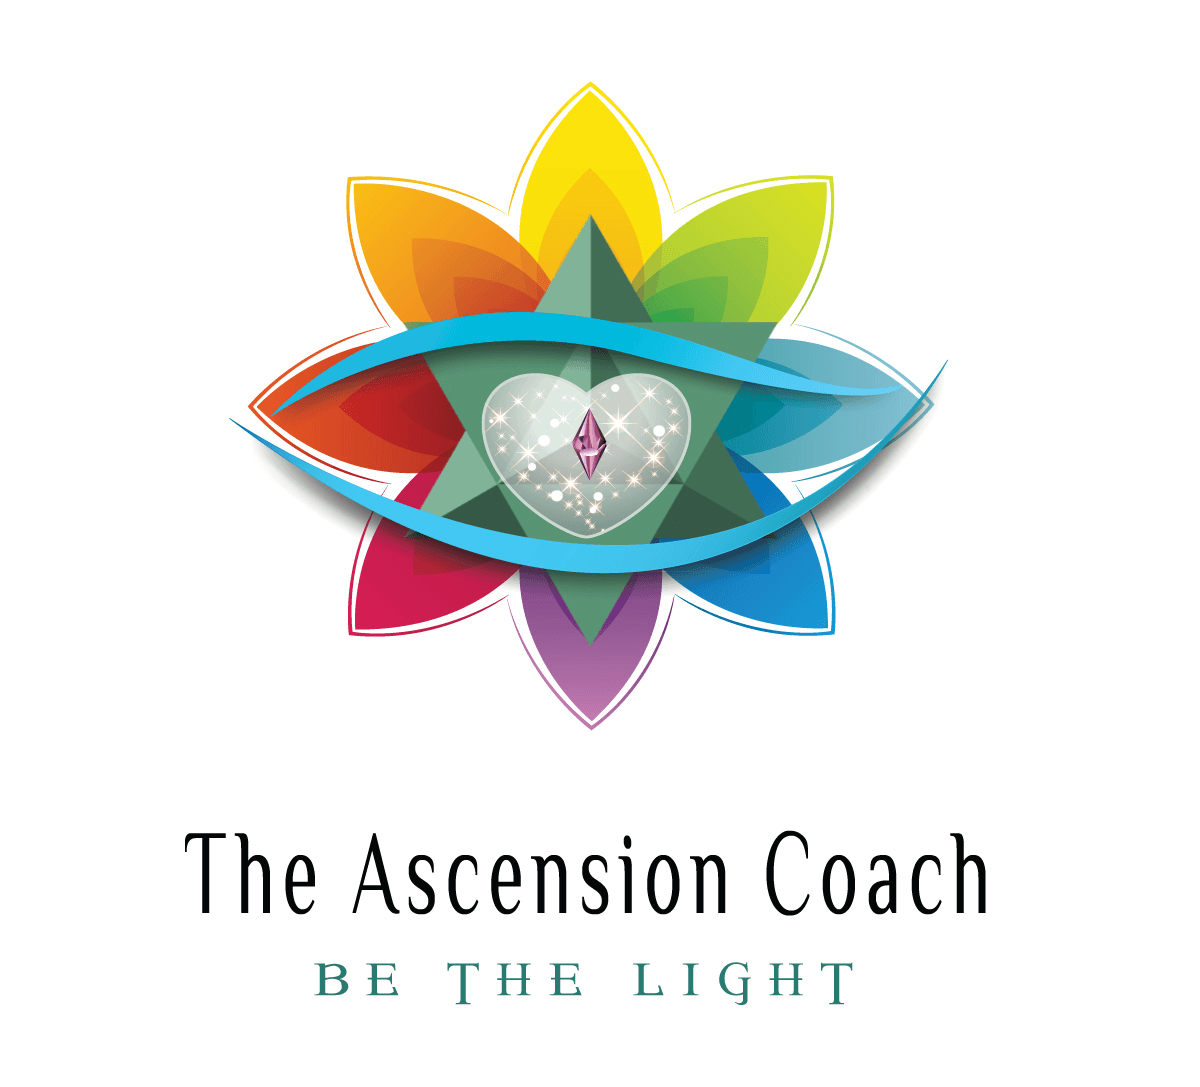 The Ascension Coach - OfficeManager4u